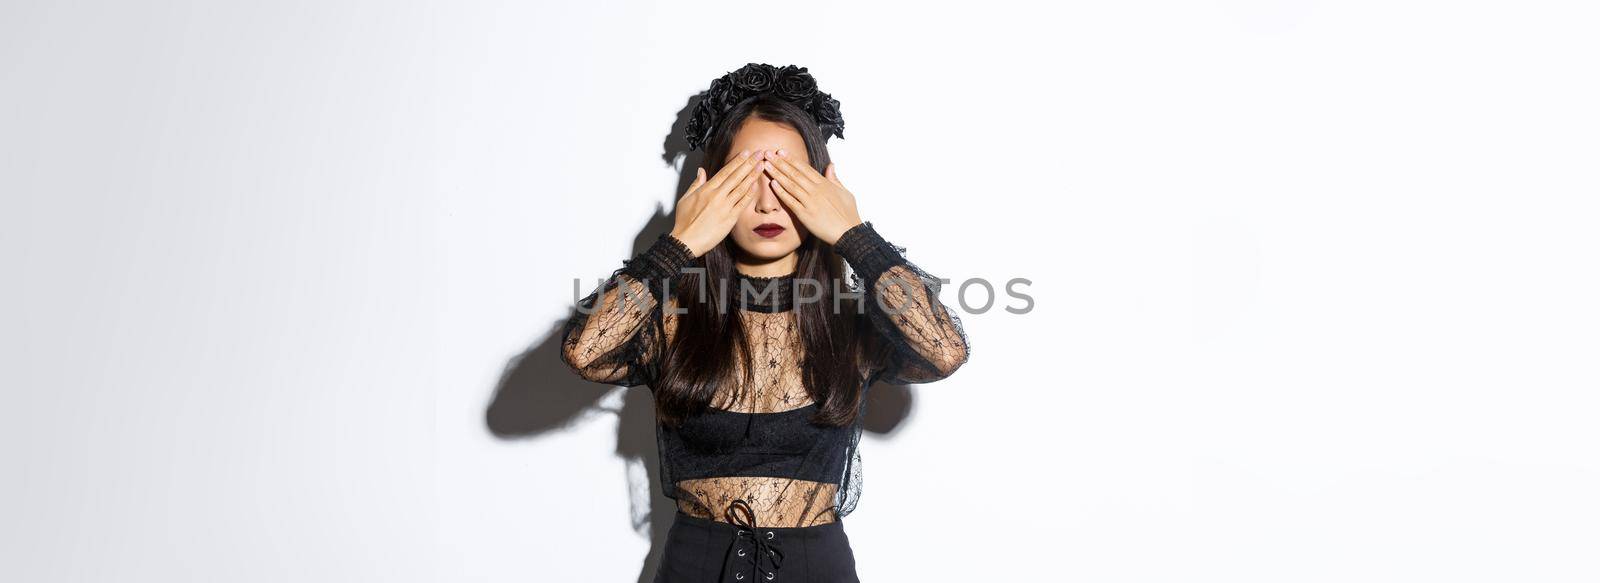 Image of woman wearing gothic wreath and black lace dress shut her eyes with hands, waiting for surprise on halloween, standing over white background with patient expression.